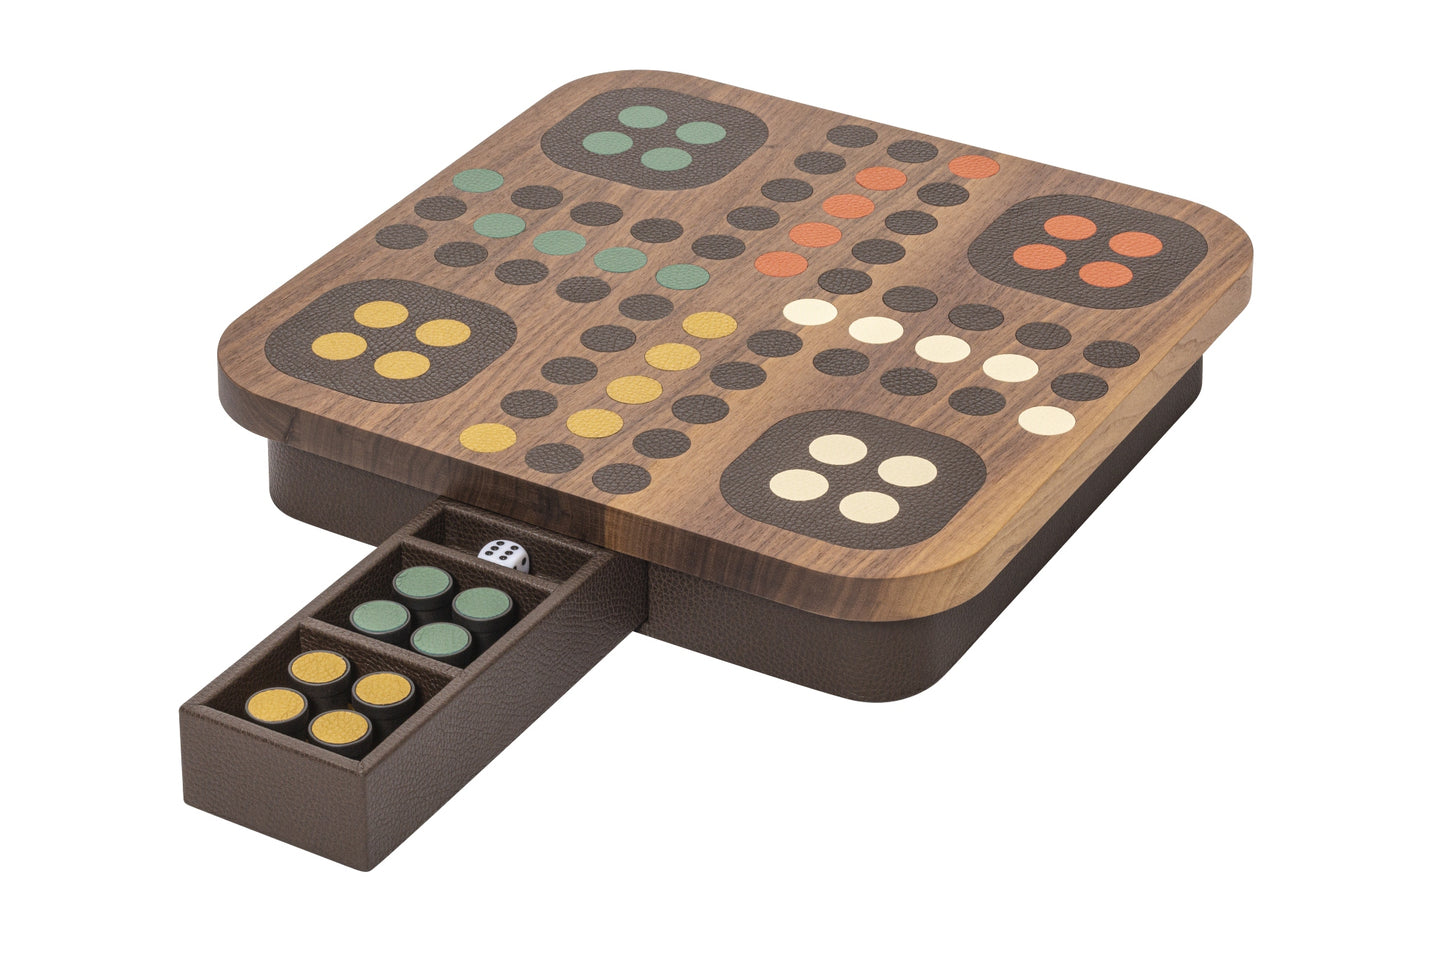 Giobagnara Delos Wood Ludo Game Set | Exquisite Walnut Wood Playing Field, Leather Inserts, and Base | Metal Game Pieces with Matching Leather Inserts | Removable Drawer for Storage of Playing Pieces and Dice | Stylish and Elegant Entertainment | 2Jour Concierge, #1 luxury high-end gift & lifestyle shop